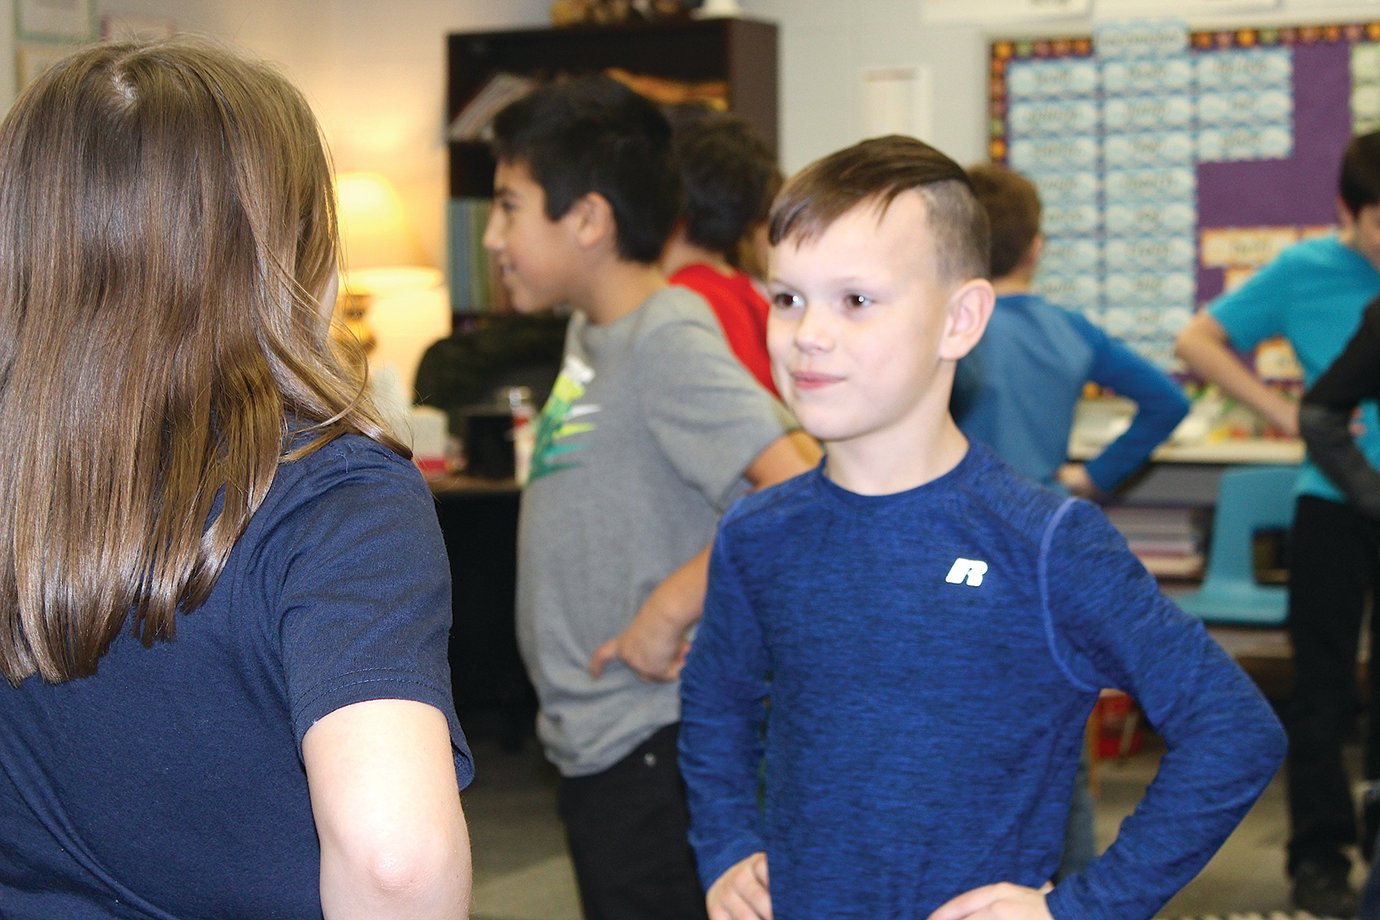 Klayten Waye, Ladoga Canner and future Southmont Mountie, looks his partner in the eye before taking the next dance step Thursday in Jennifer Ellingwood's music class.